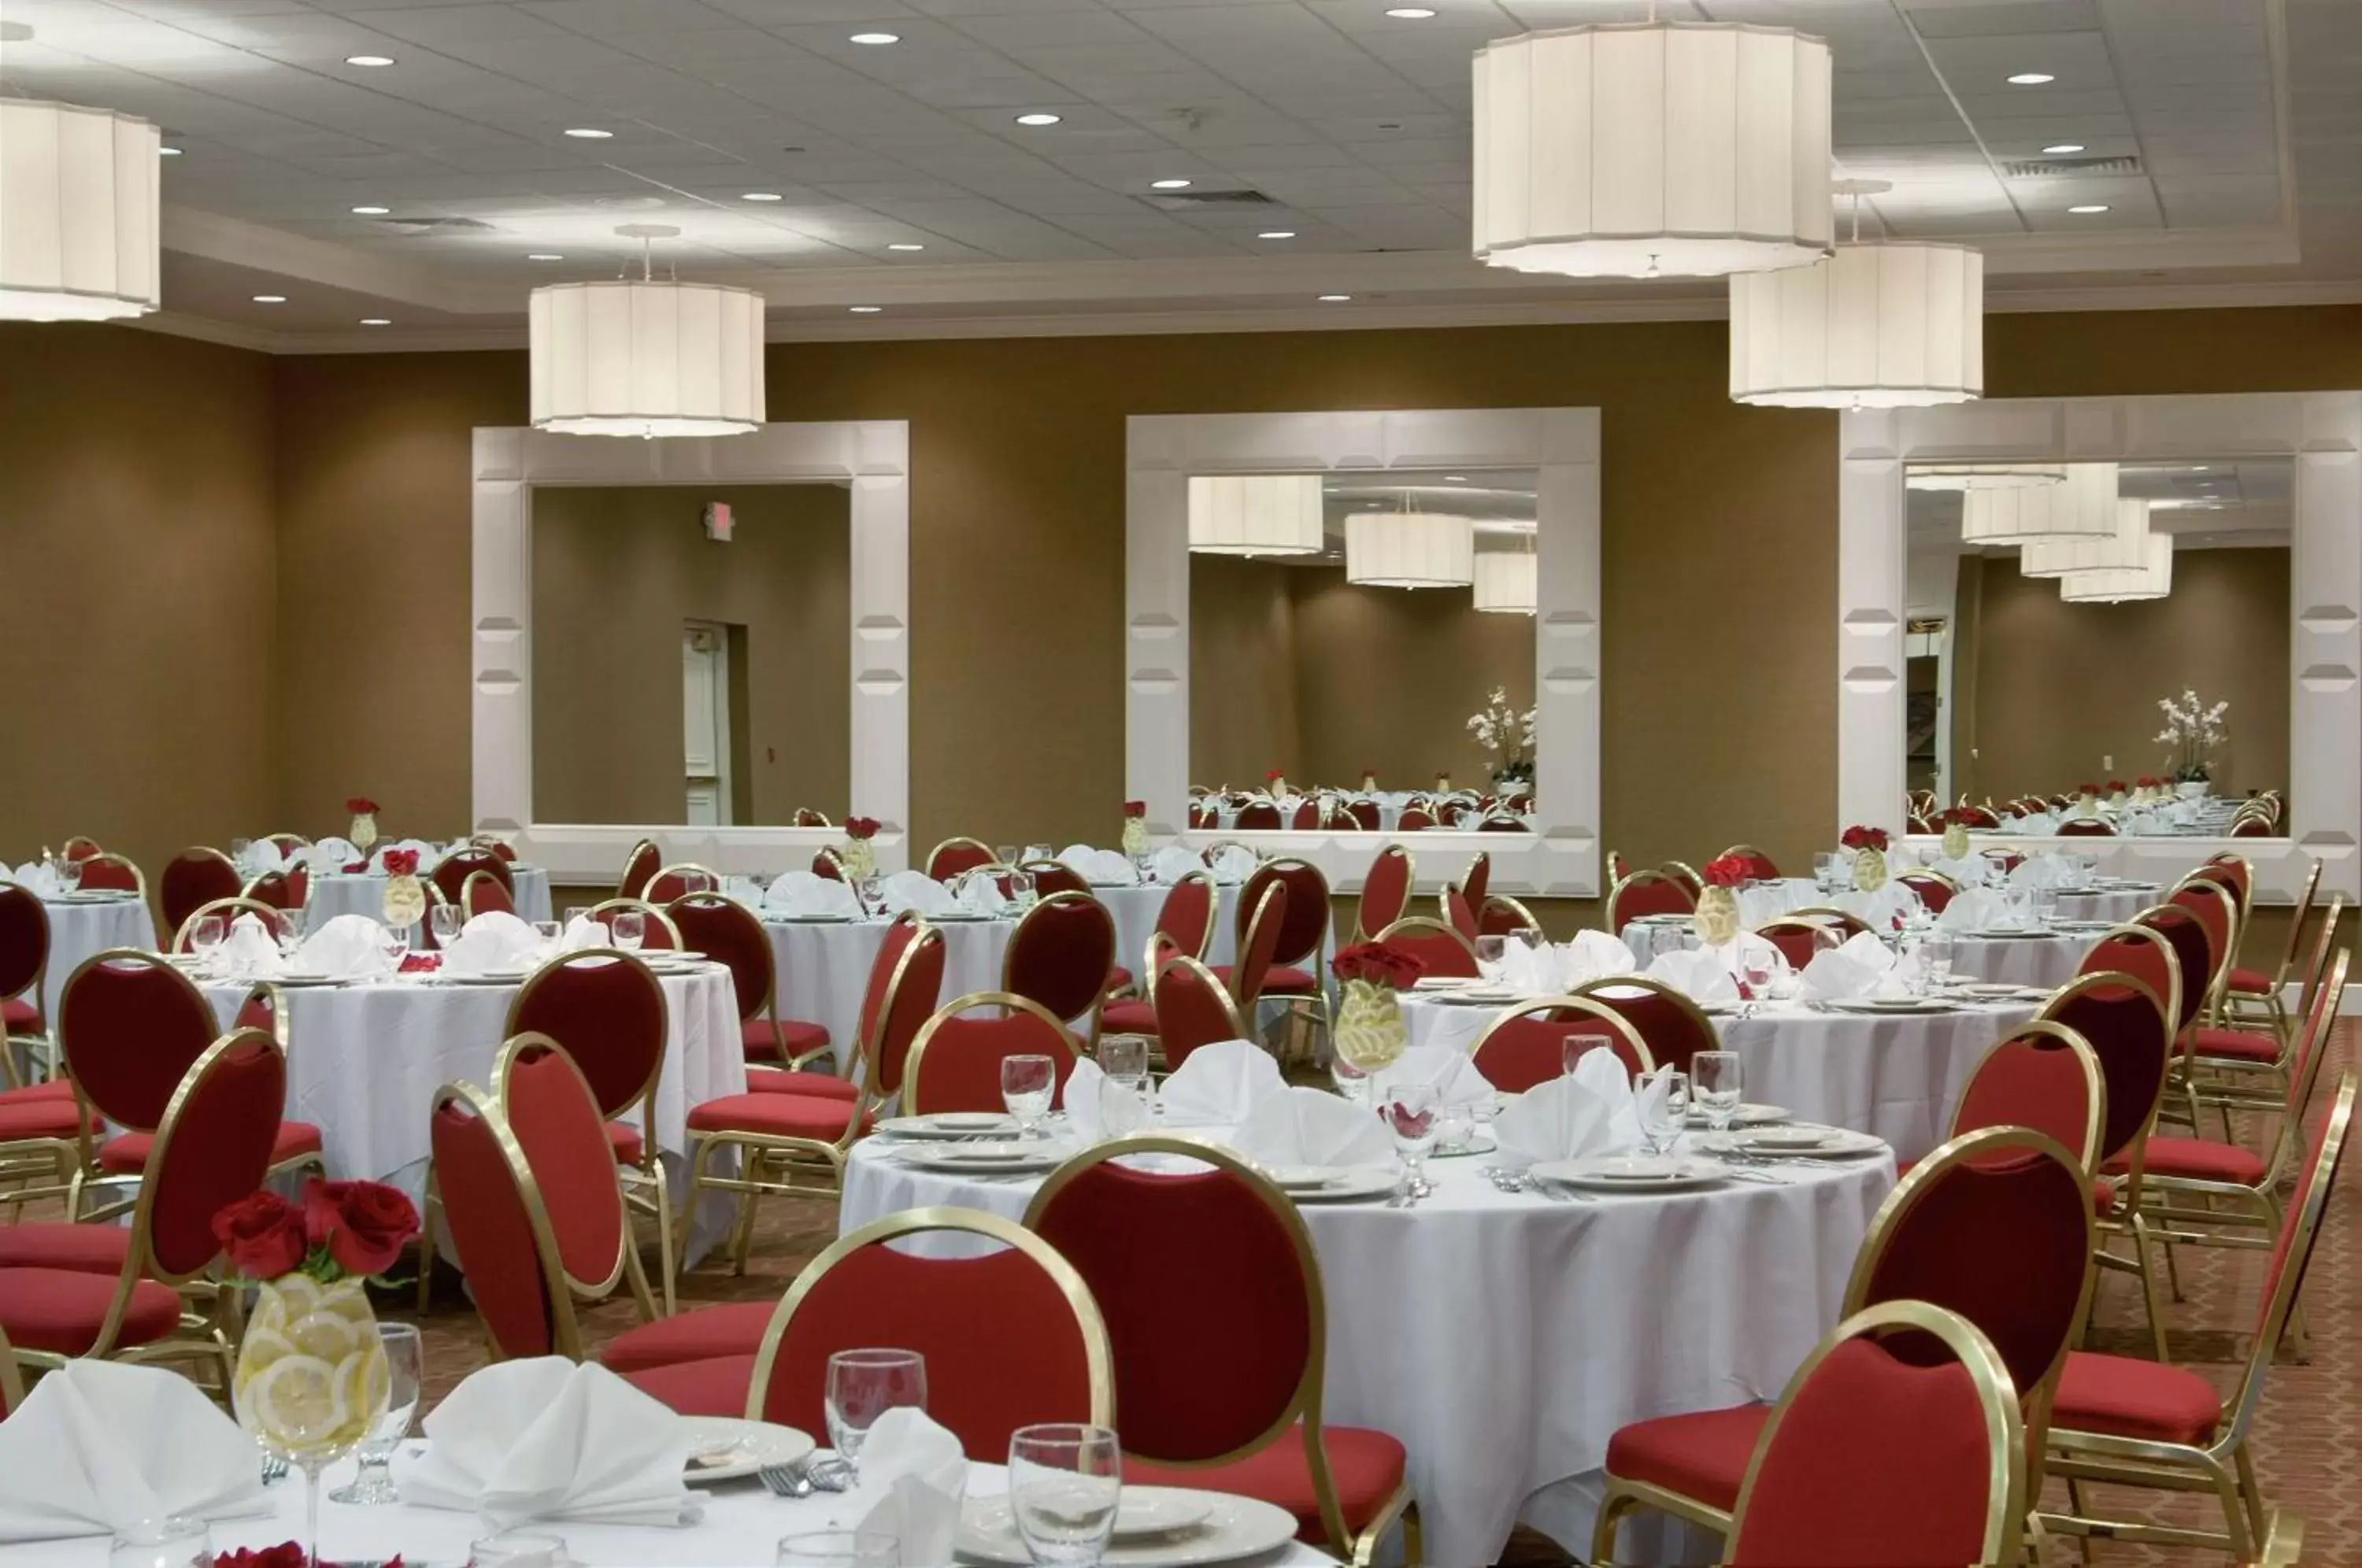 Meeting/conference room, Banquet Facilities in Hilton St. Louis Airport